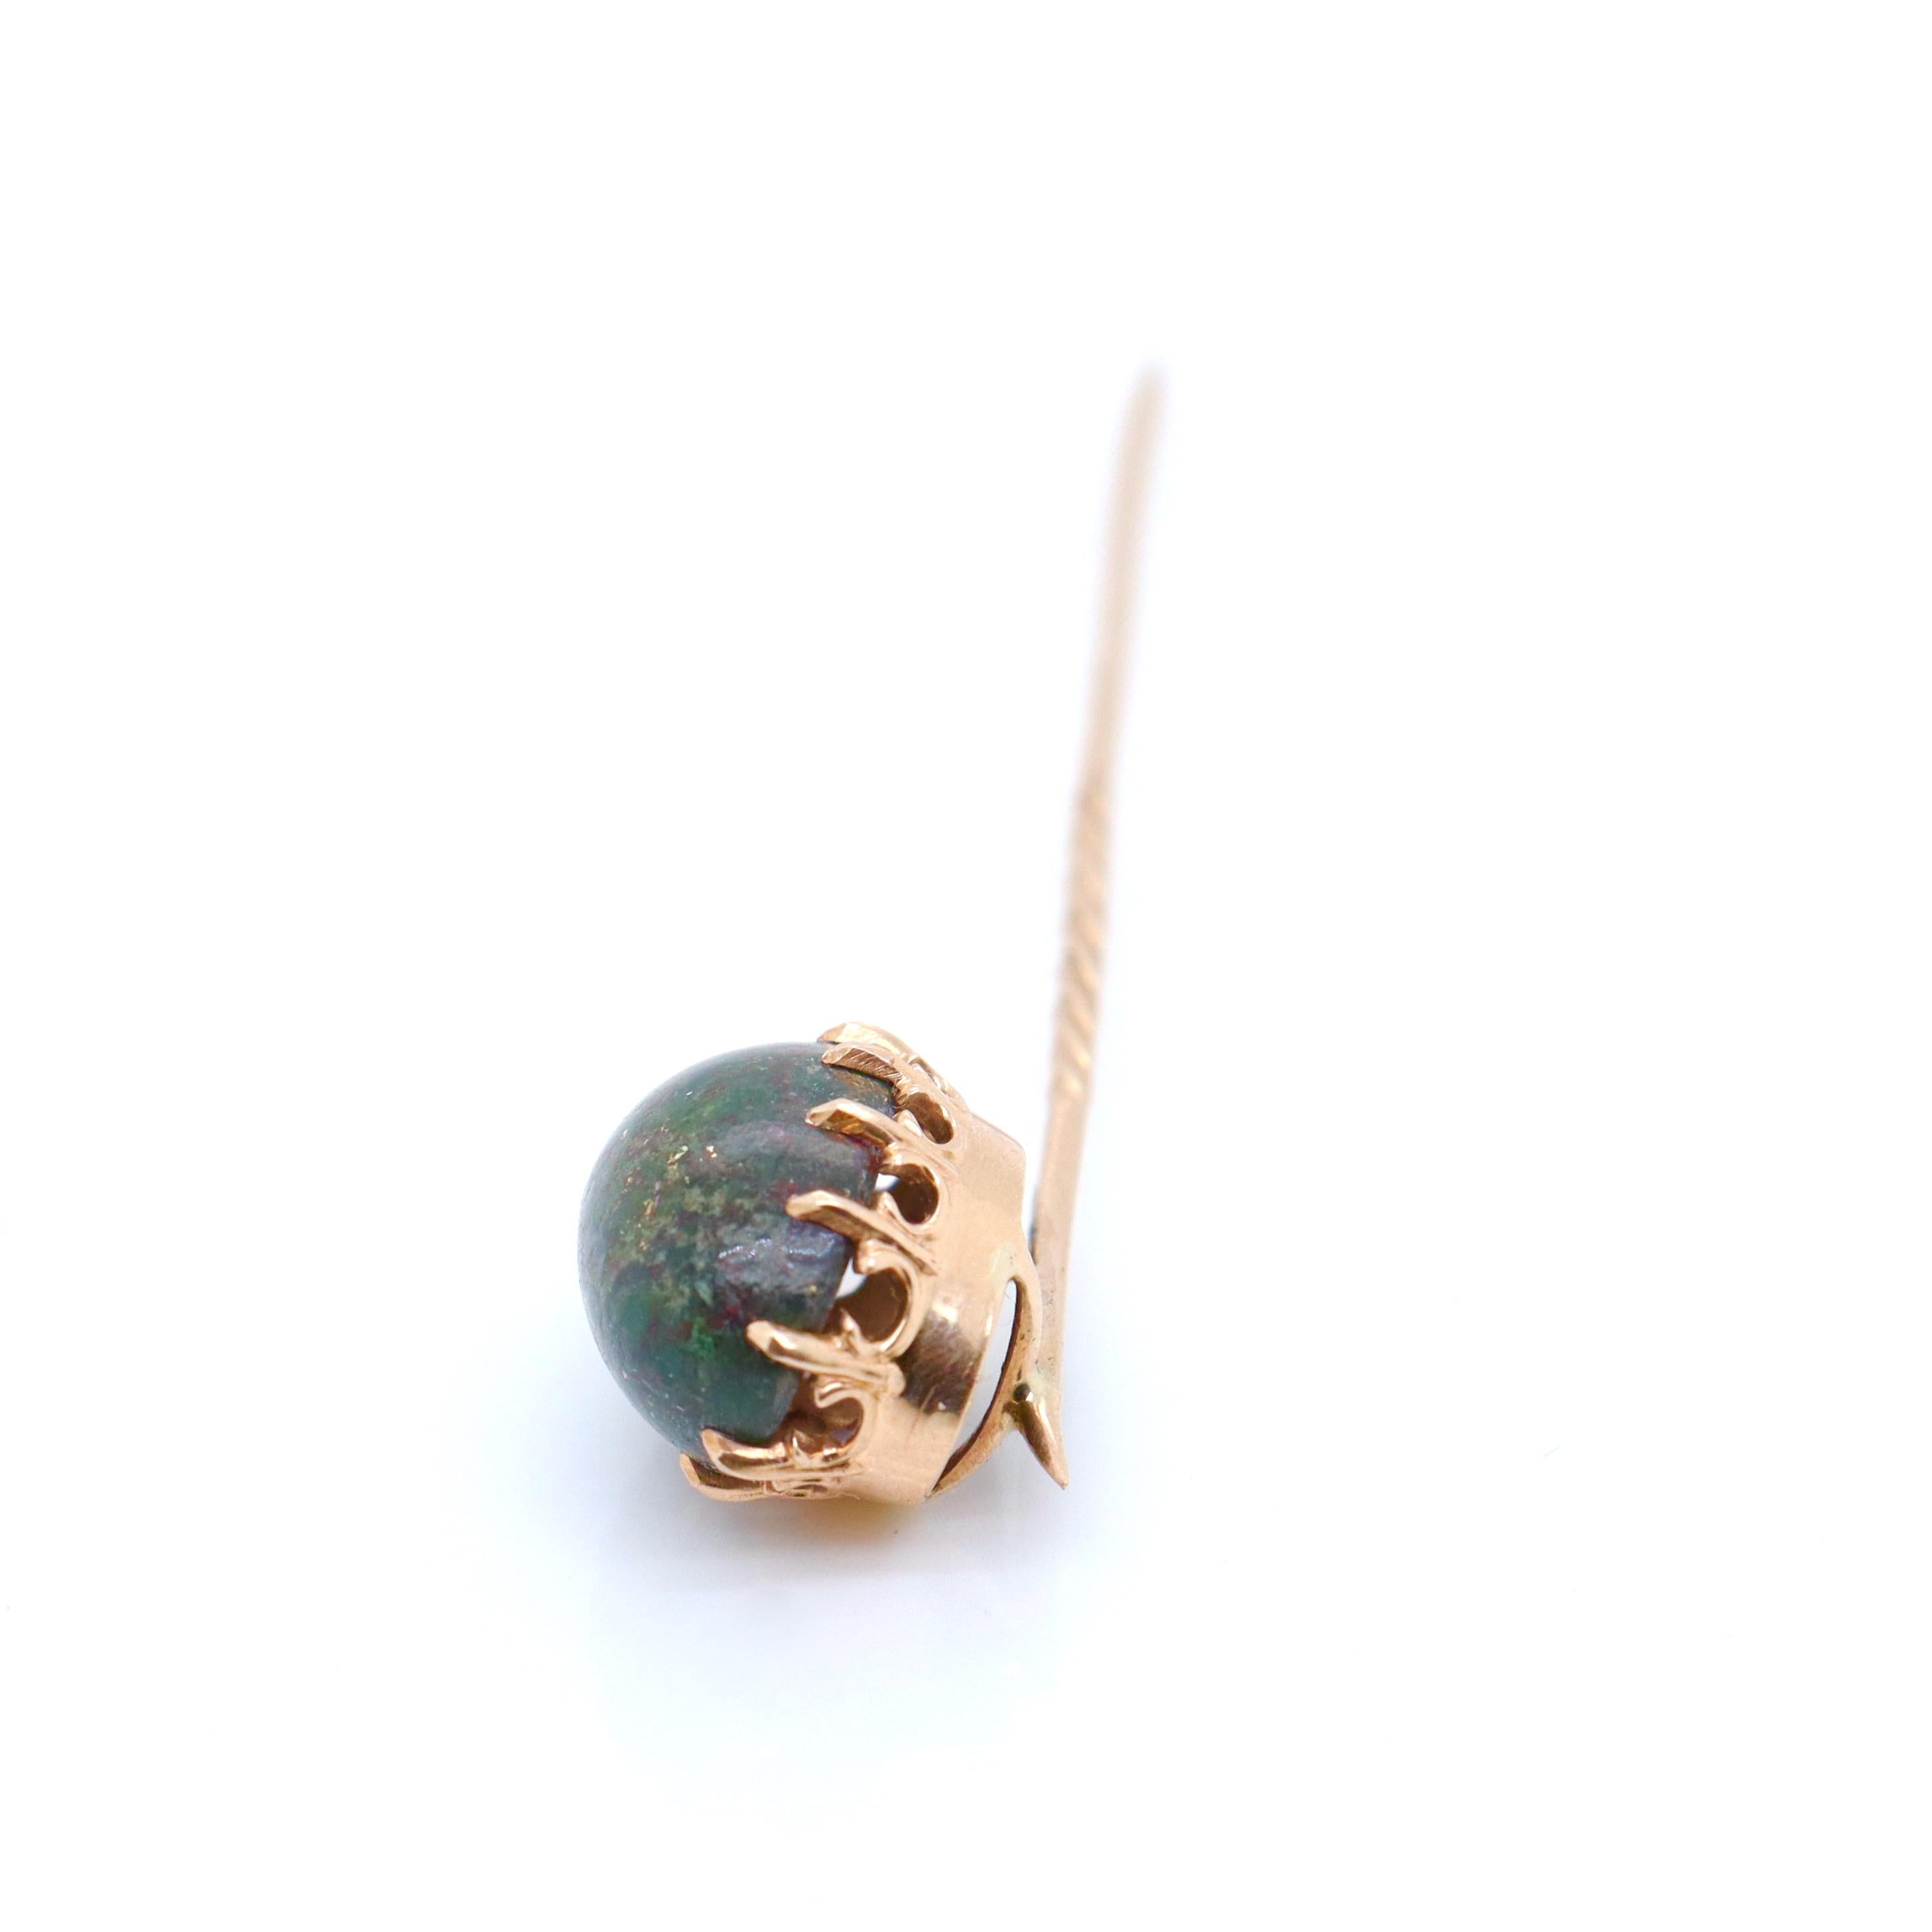 Antique Edwardian 14k Gold and Bloodstone Cabochon Stick Pin For Sale 1